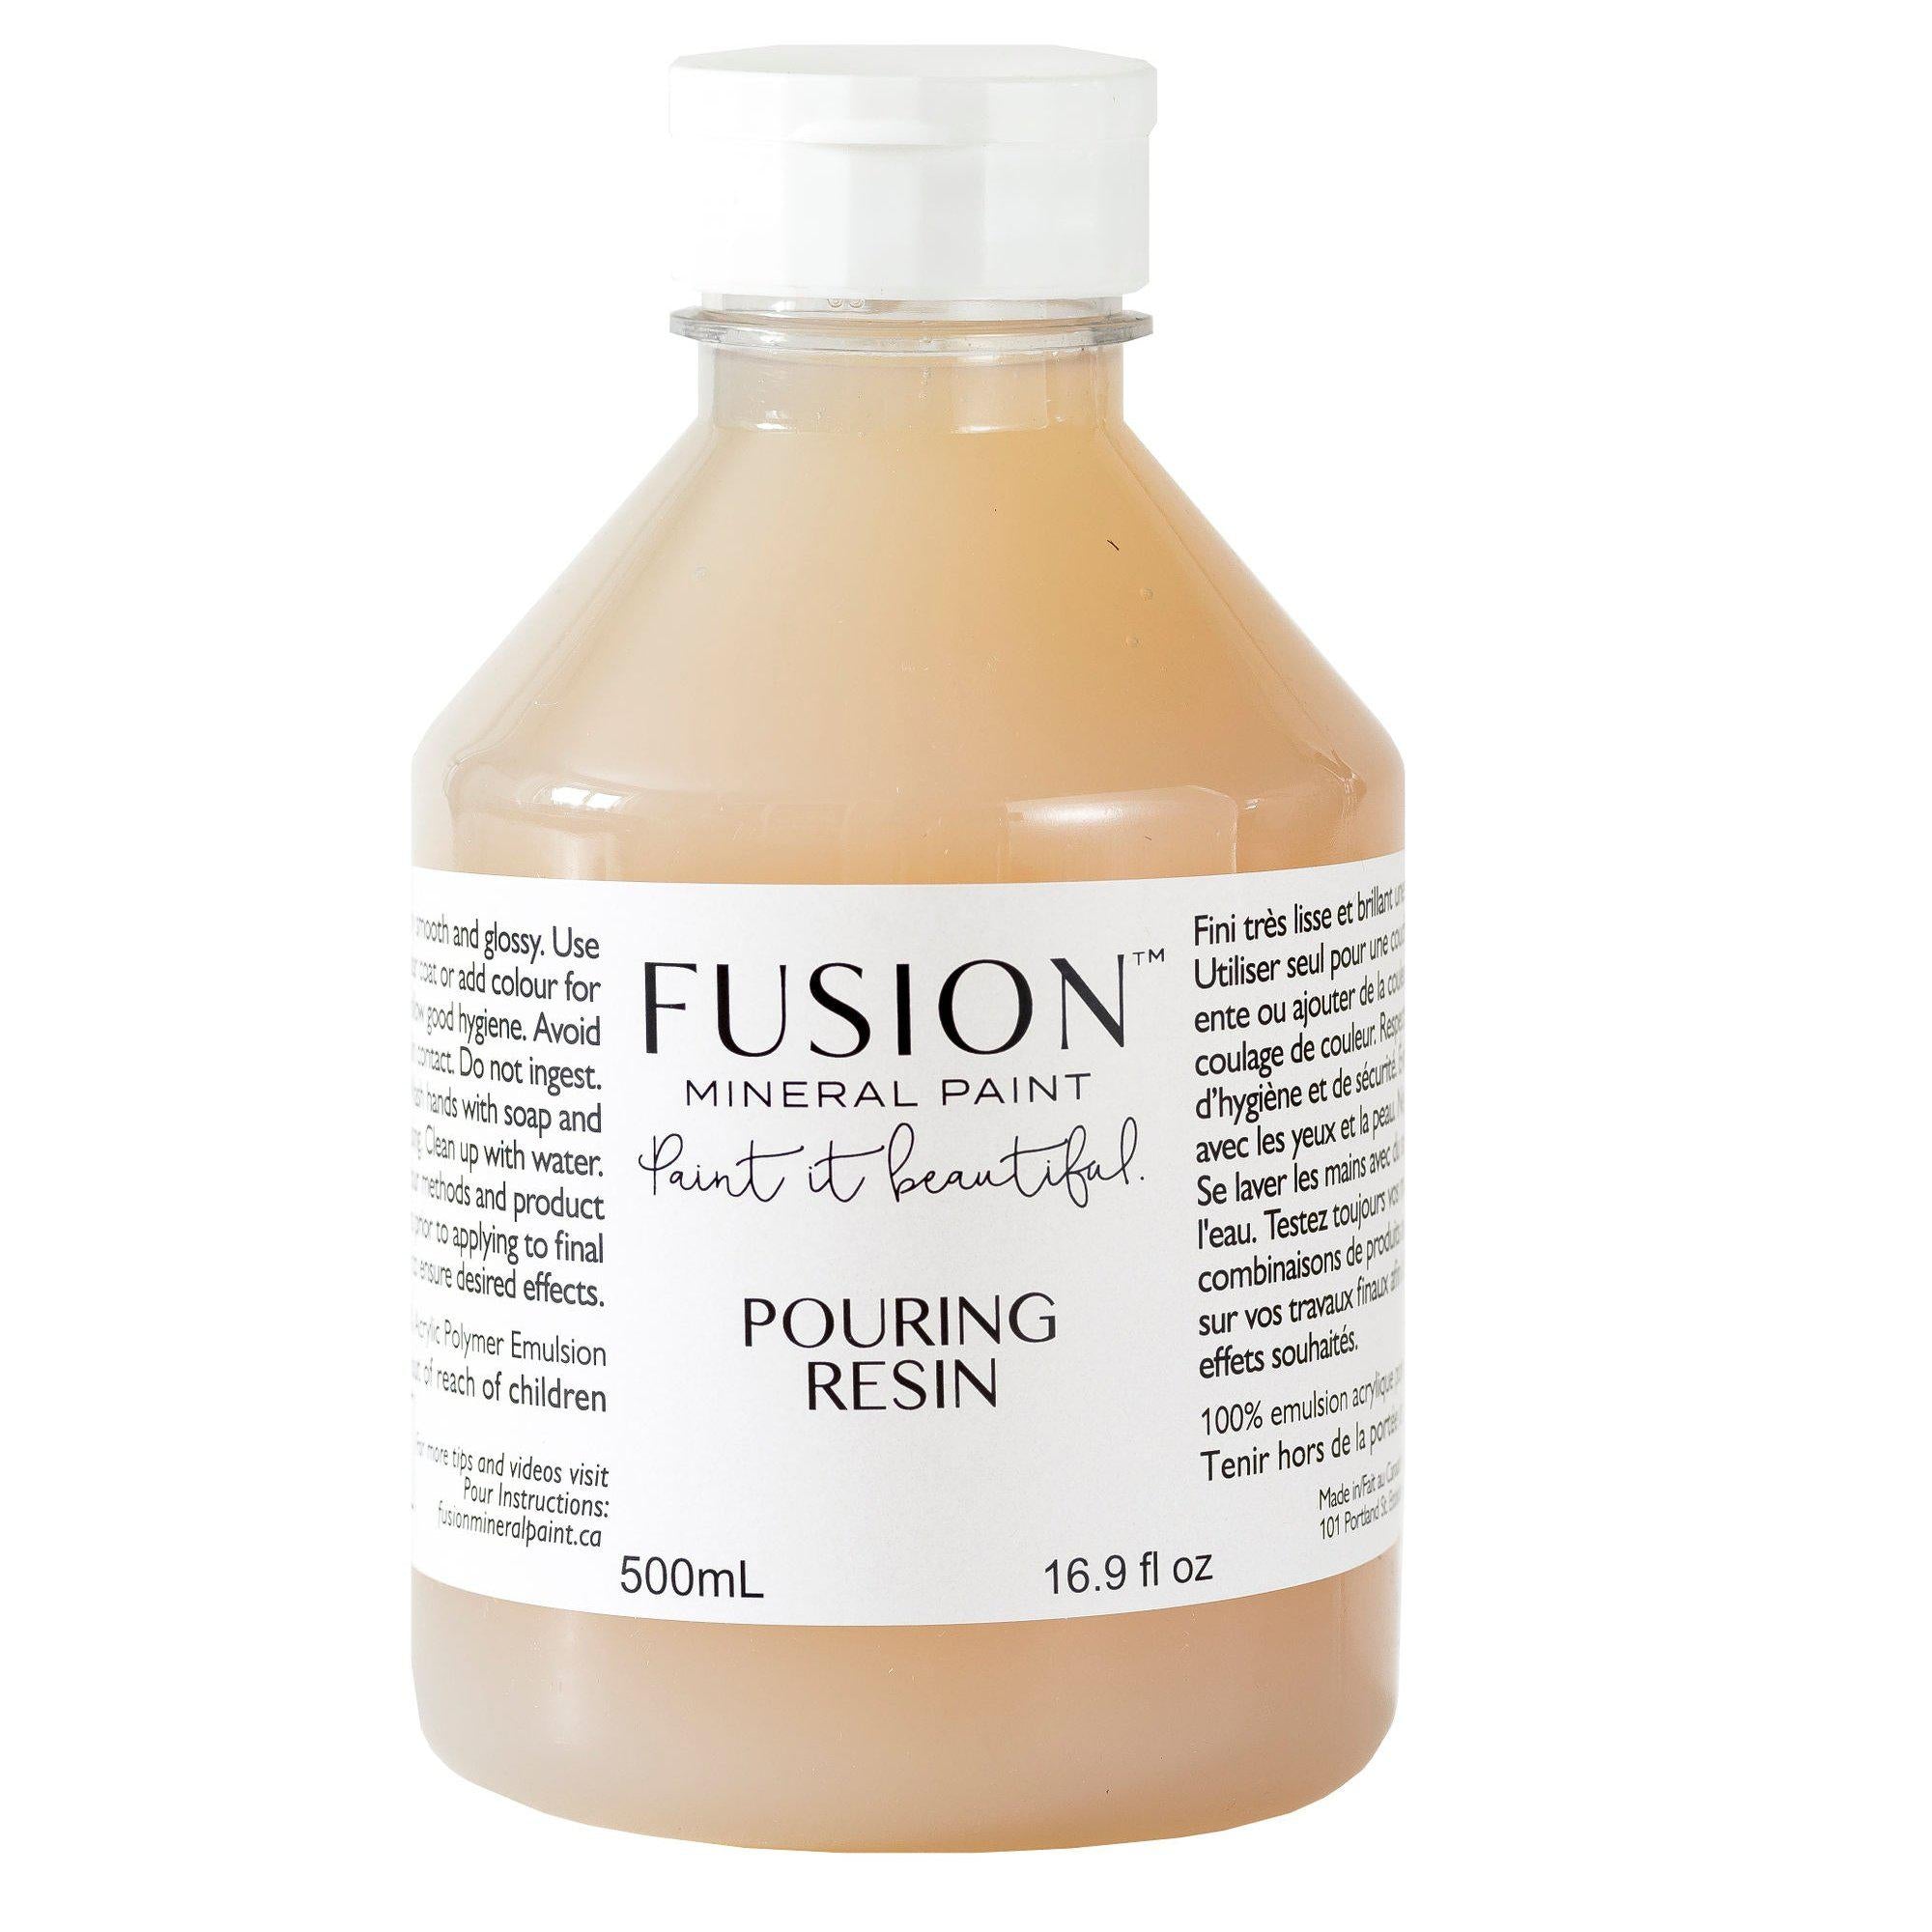 Pouring Resin by Fusion Mineral Paint @ Painted Heirloom